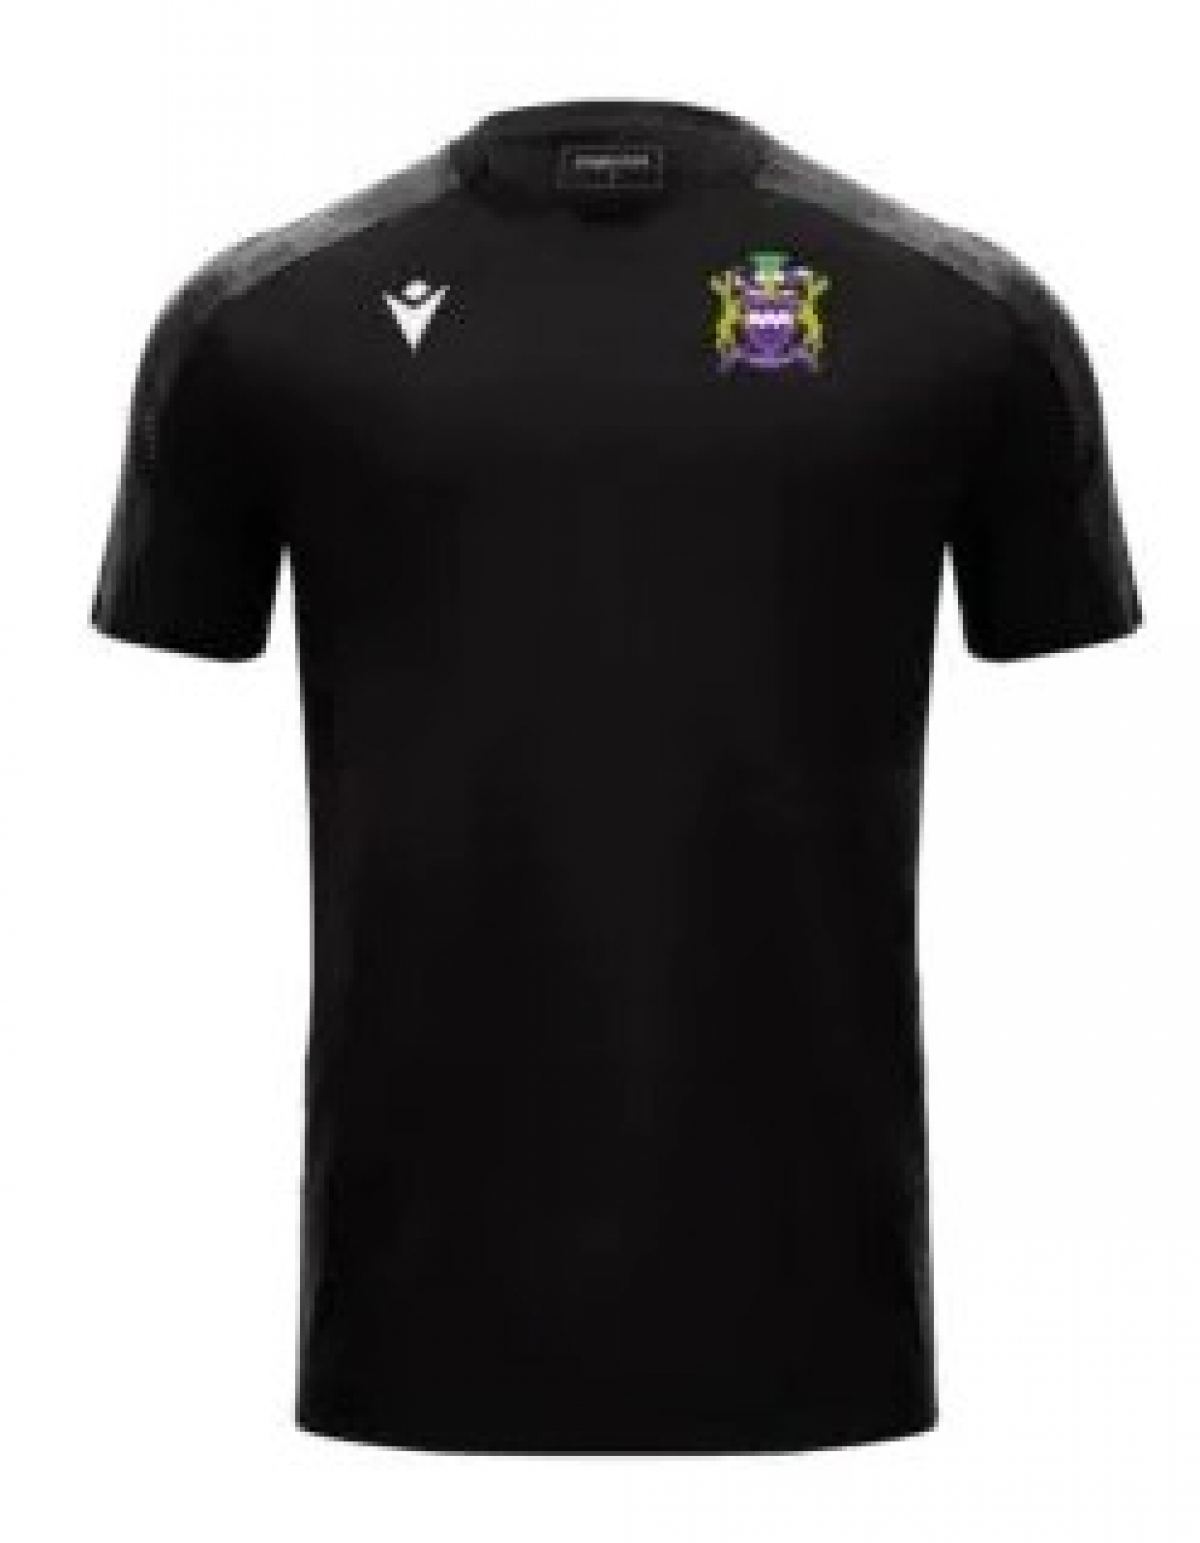 WHFC Youth Boys Branded Clothing